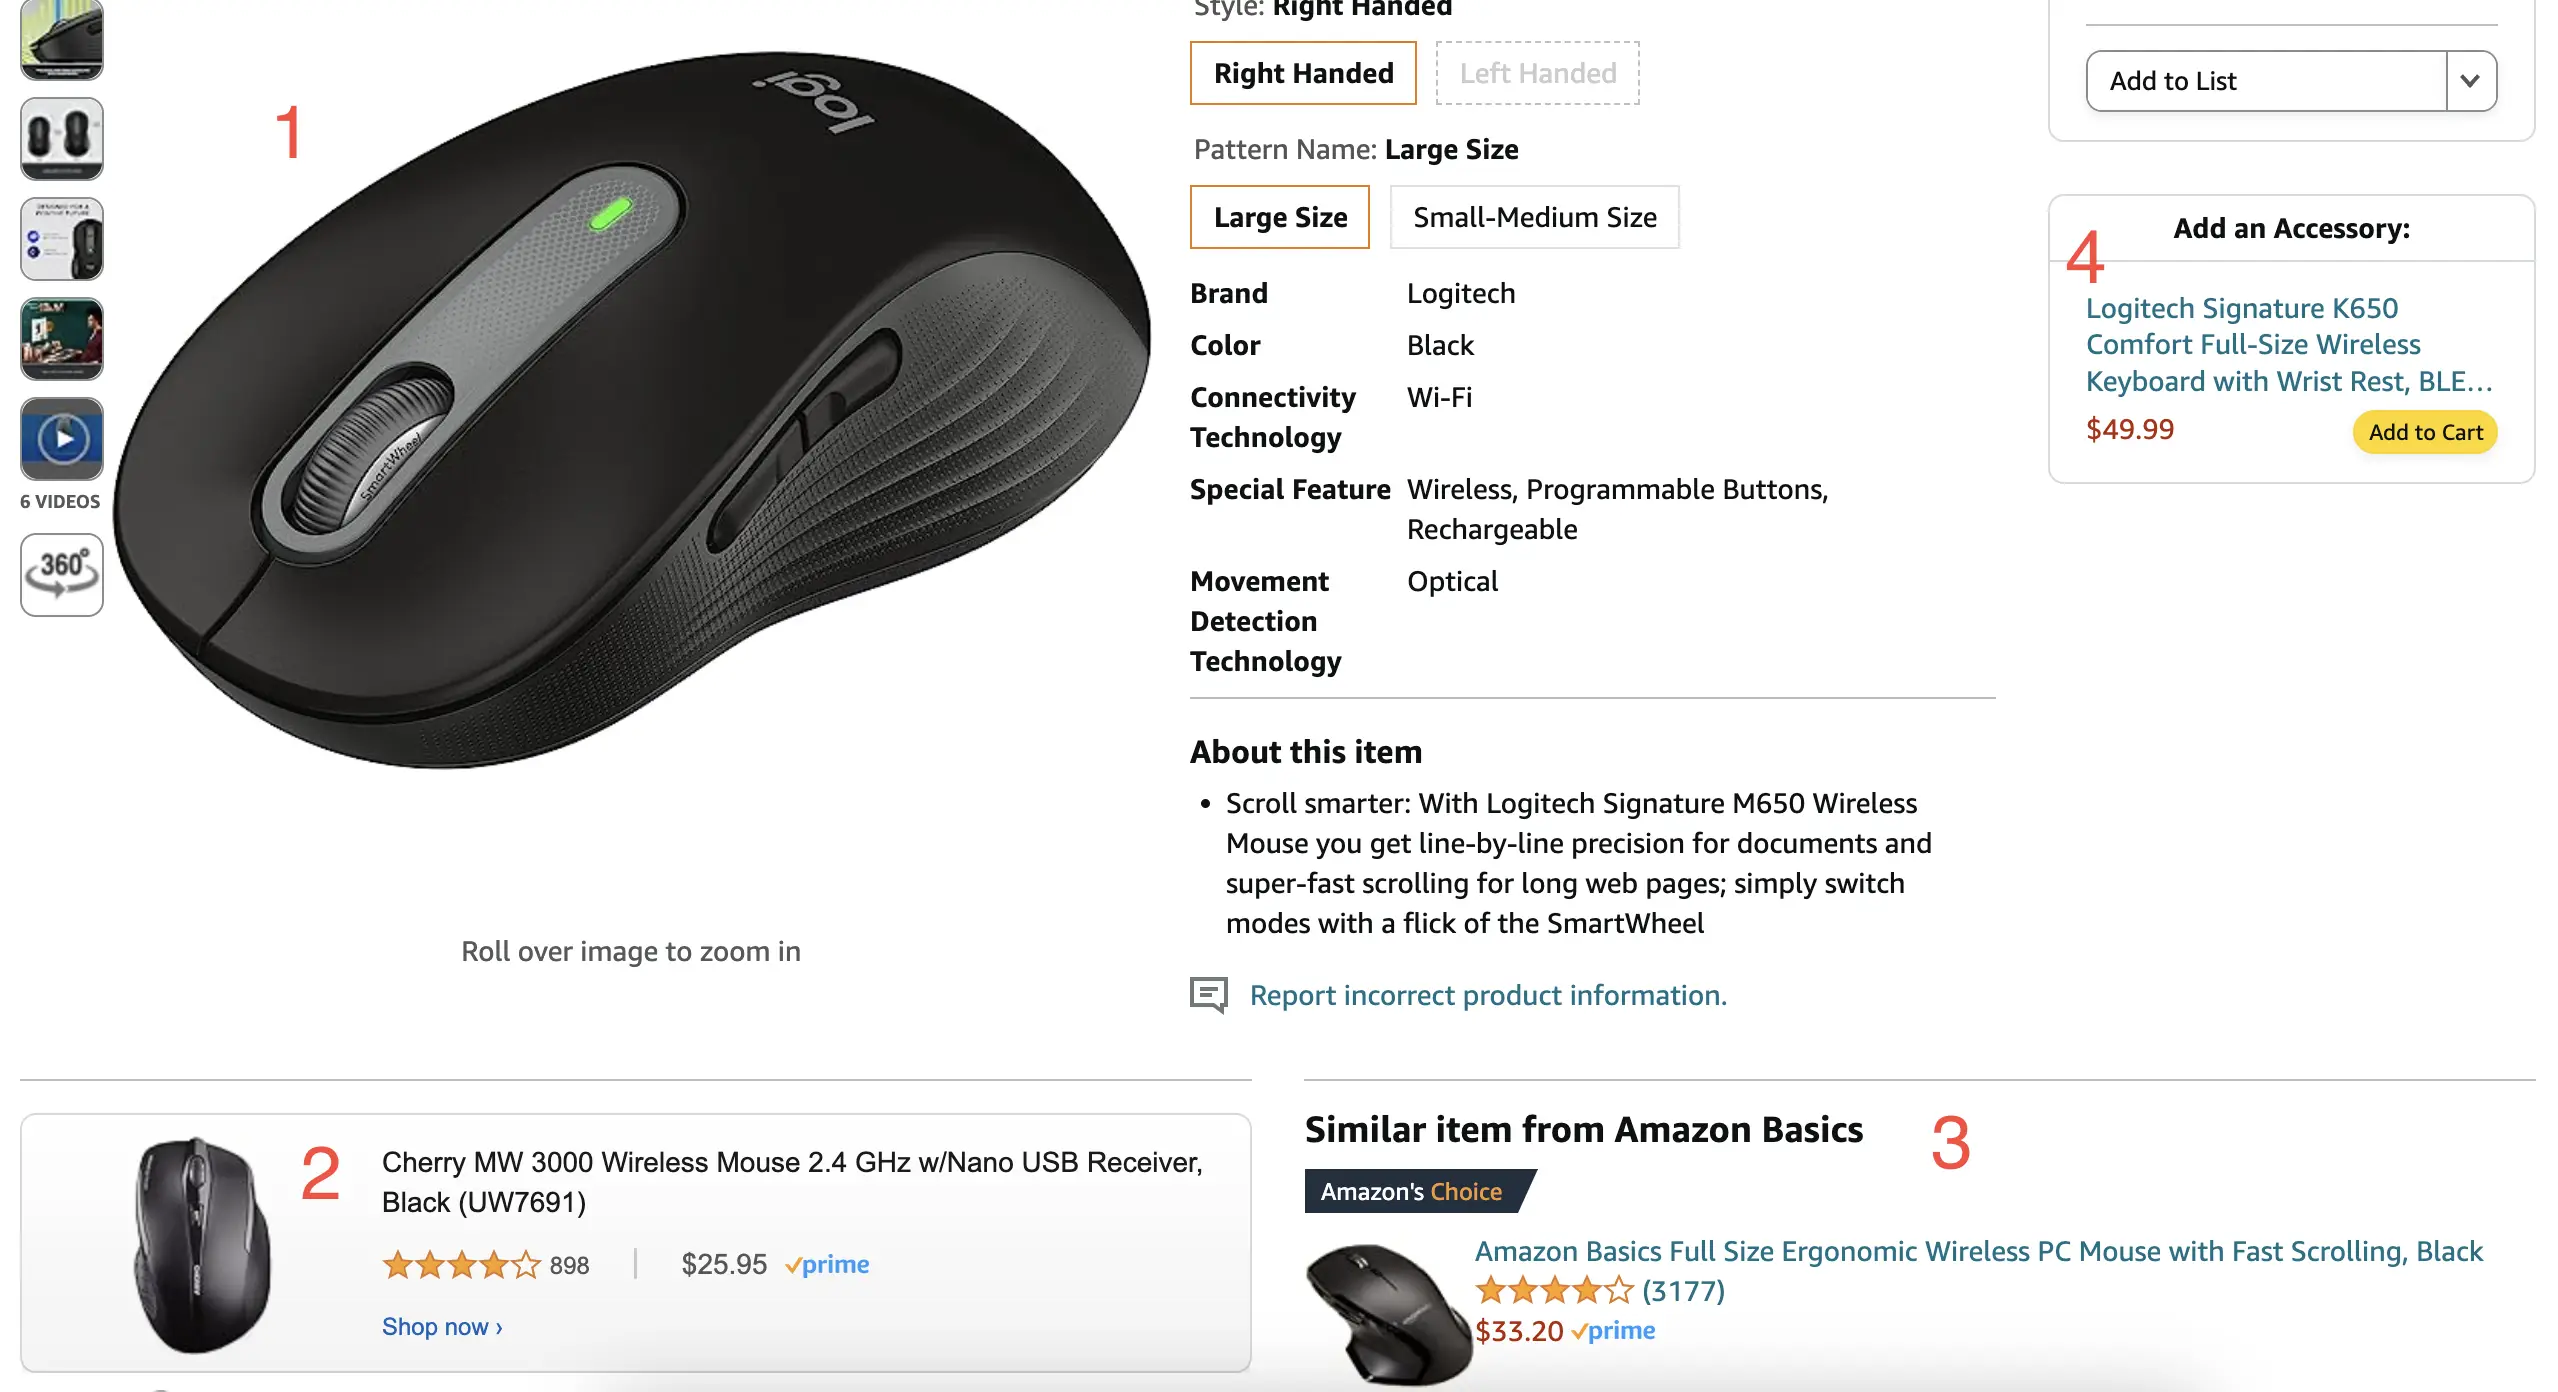 Screenshot of a computer mouse in Amazon.com